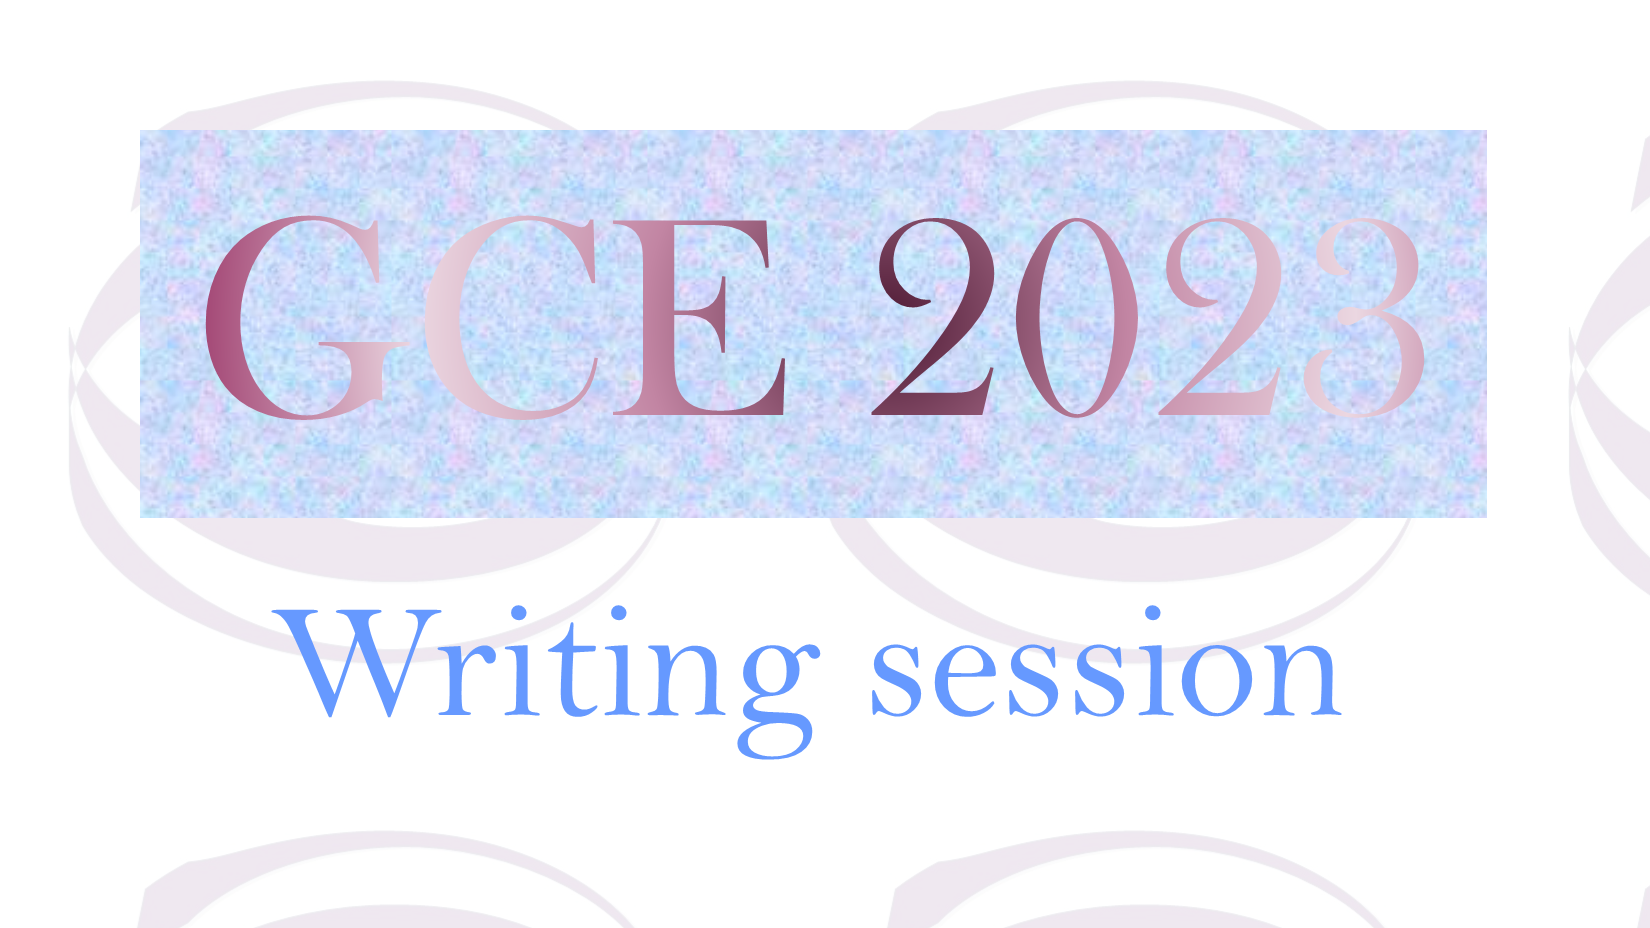 Blog Imageuploads/blogs/GCE 2023 writing session.png